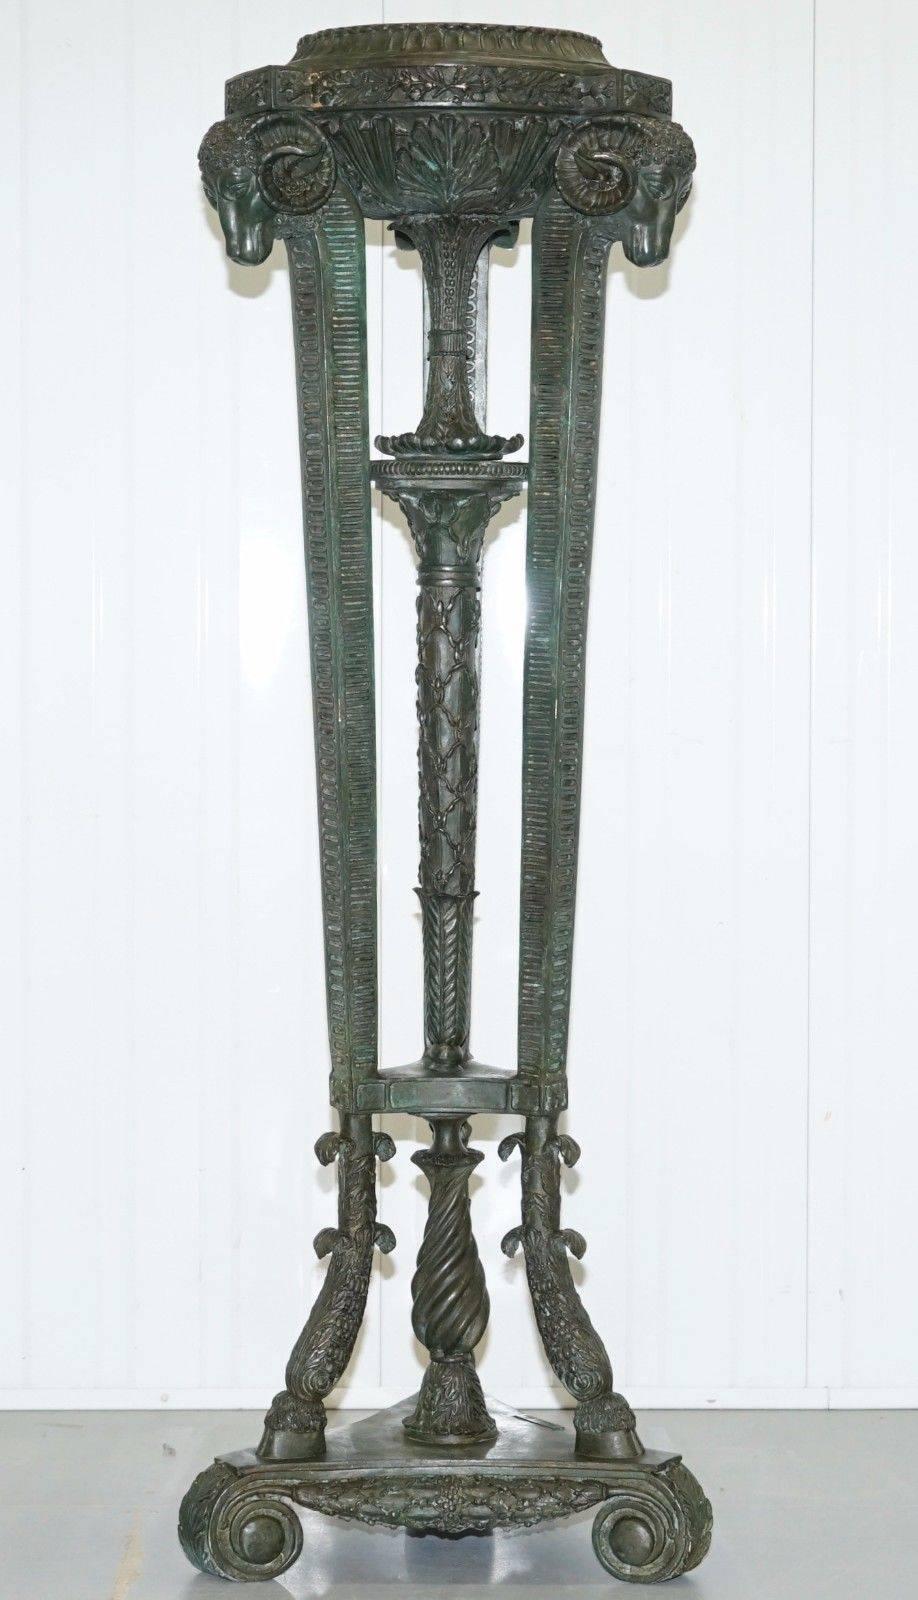 We are delighted to offer for sale this stunning very large and heavy bronze pillared stand with rams head detailing

This is one of the large bronze pieces I have ever seen, a really grange statement piece, the rams head casting seems well